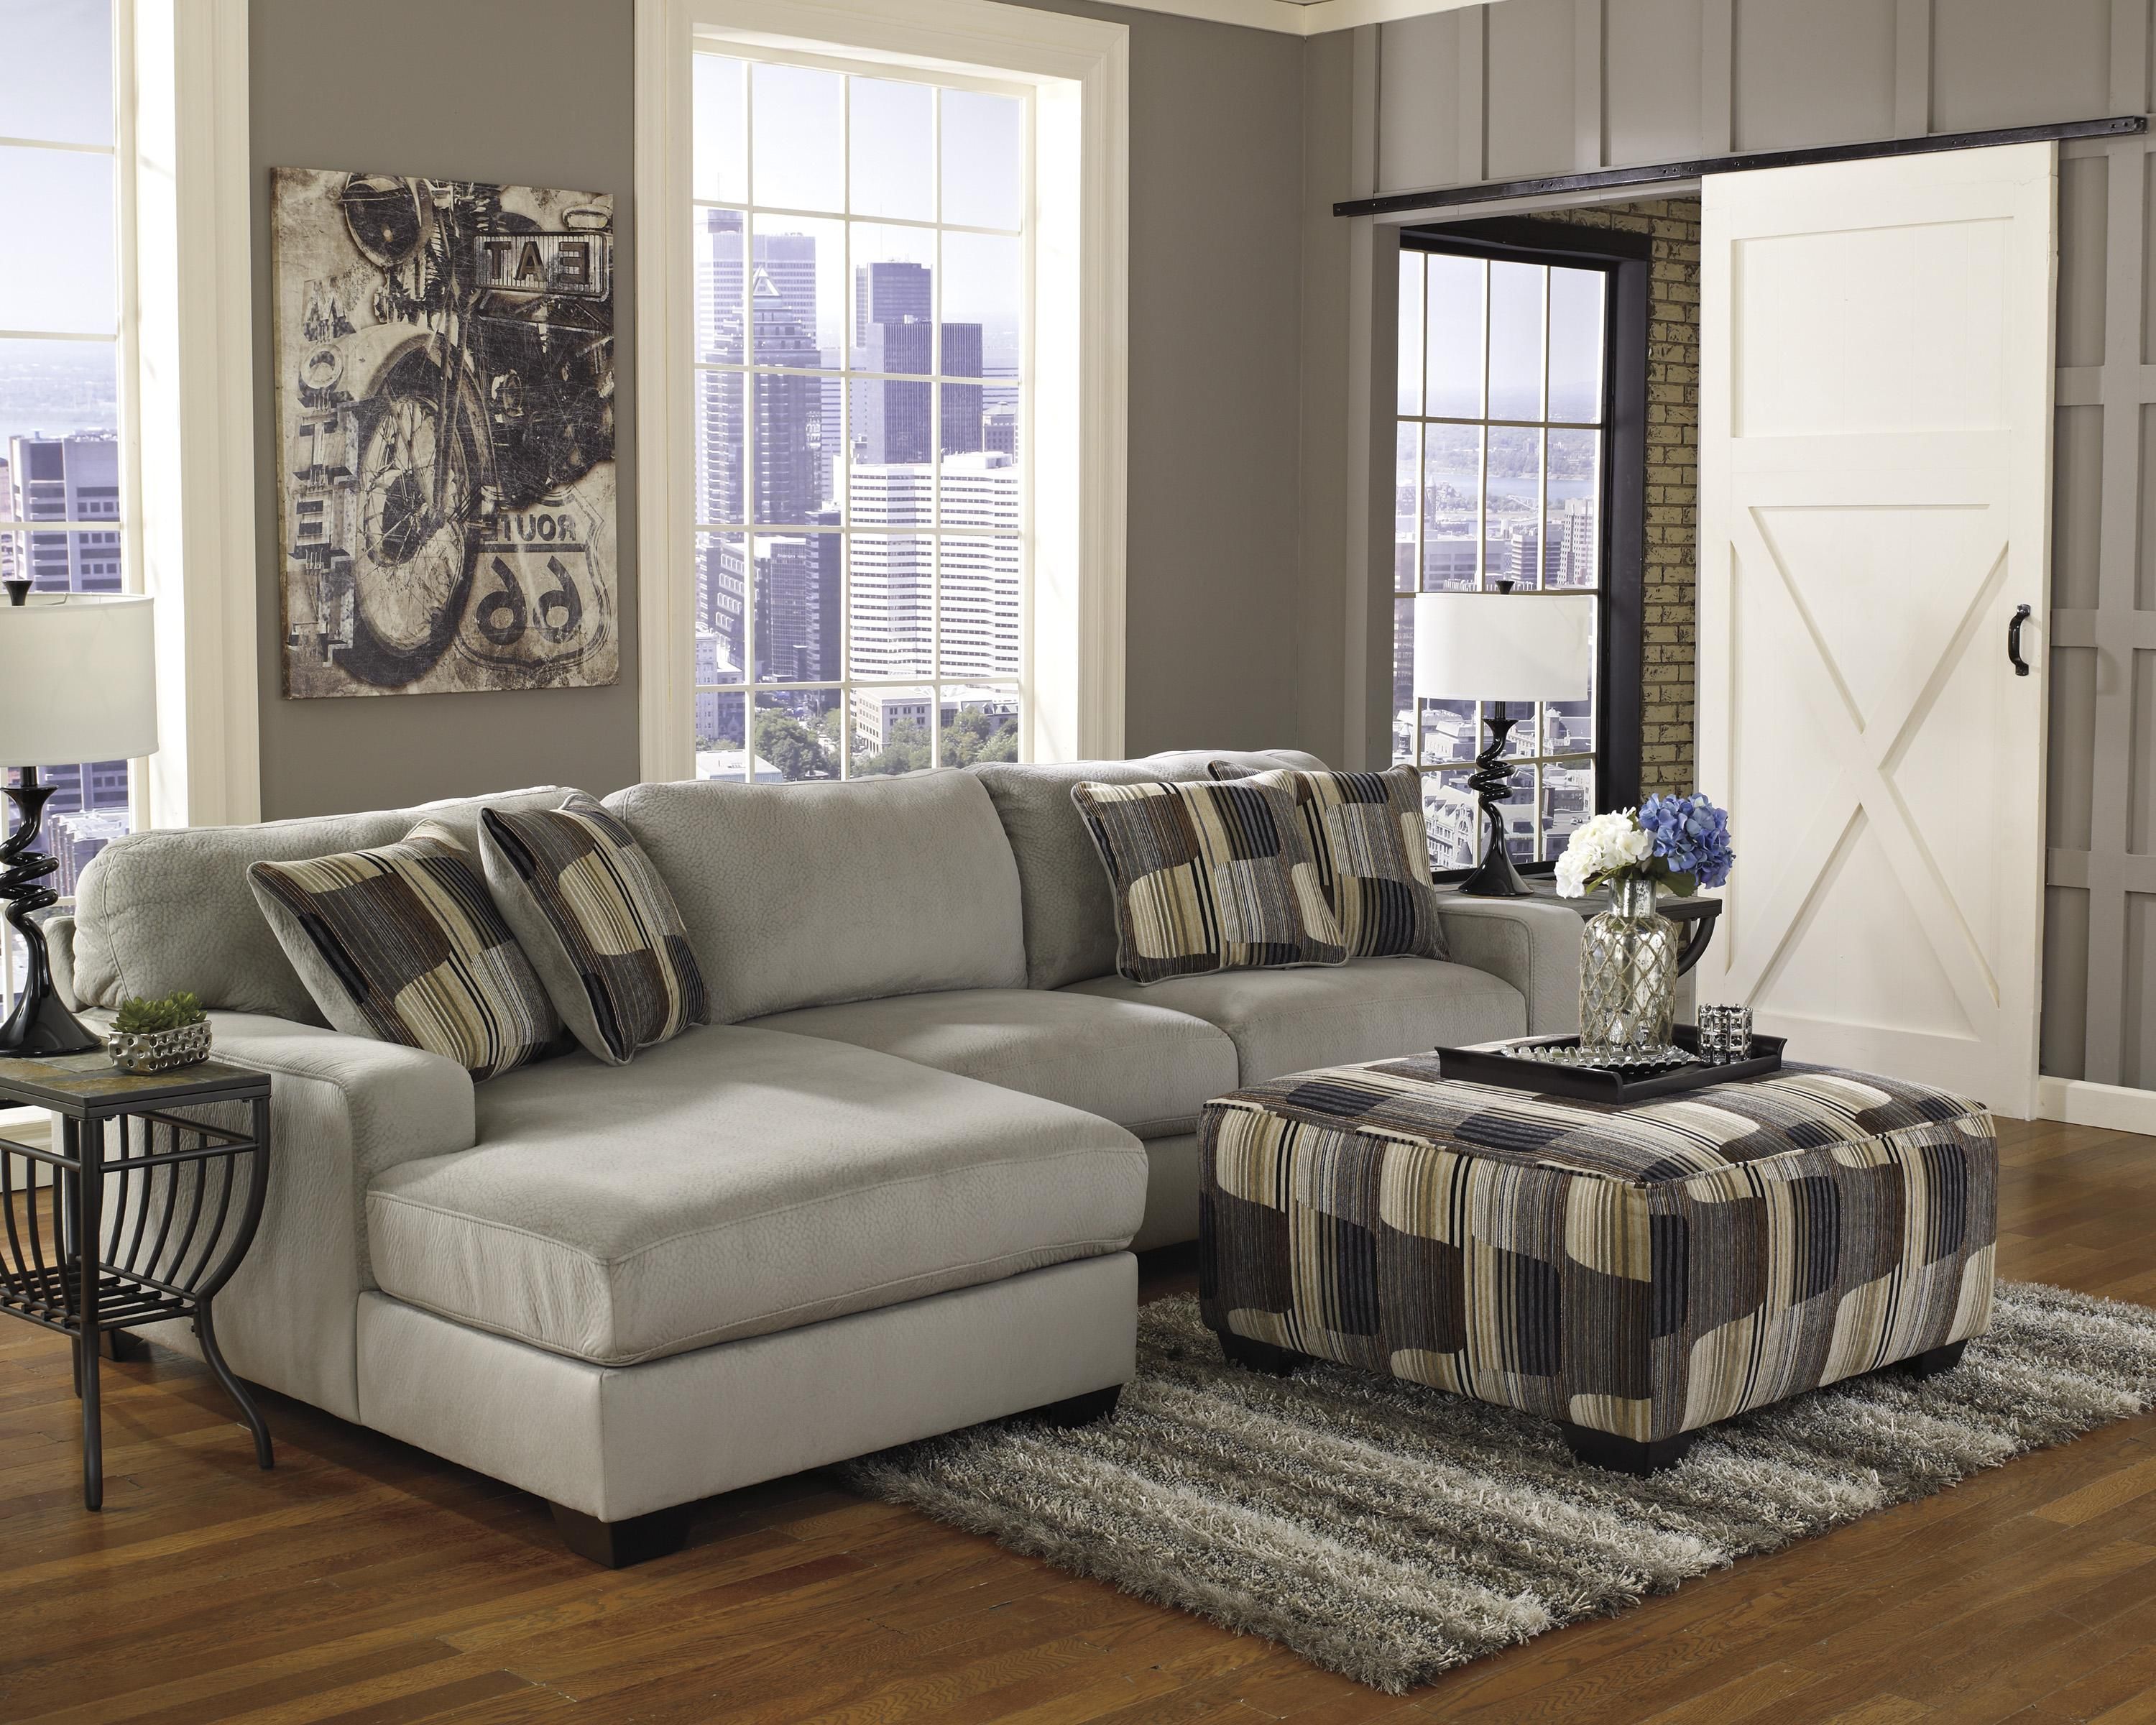 High quality Fabric Sofas For Small Living Rooms